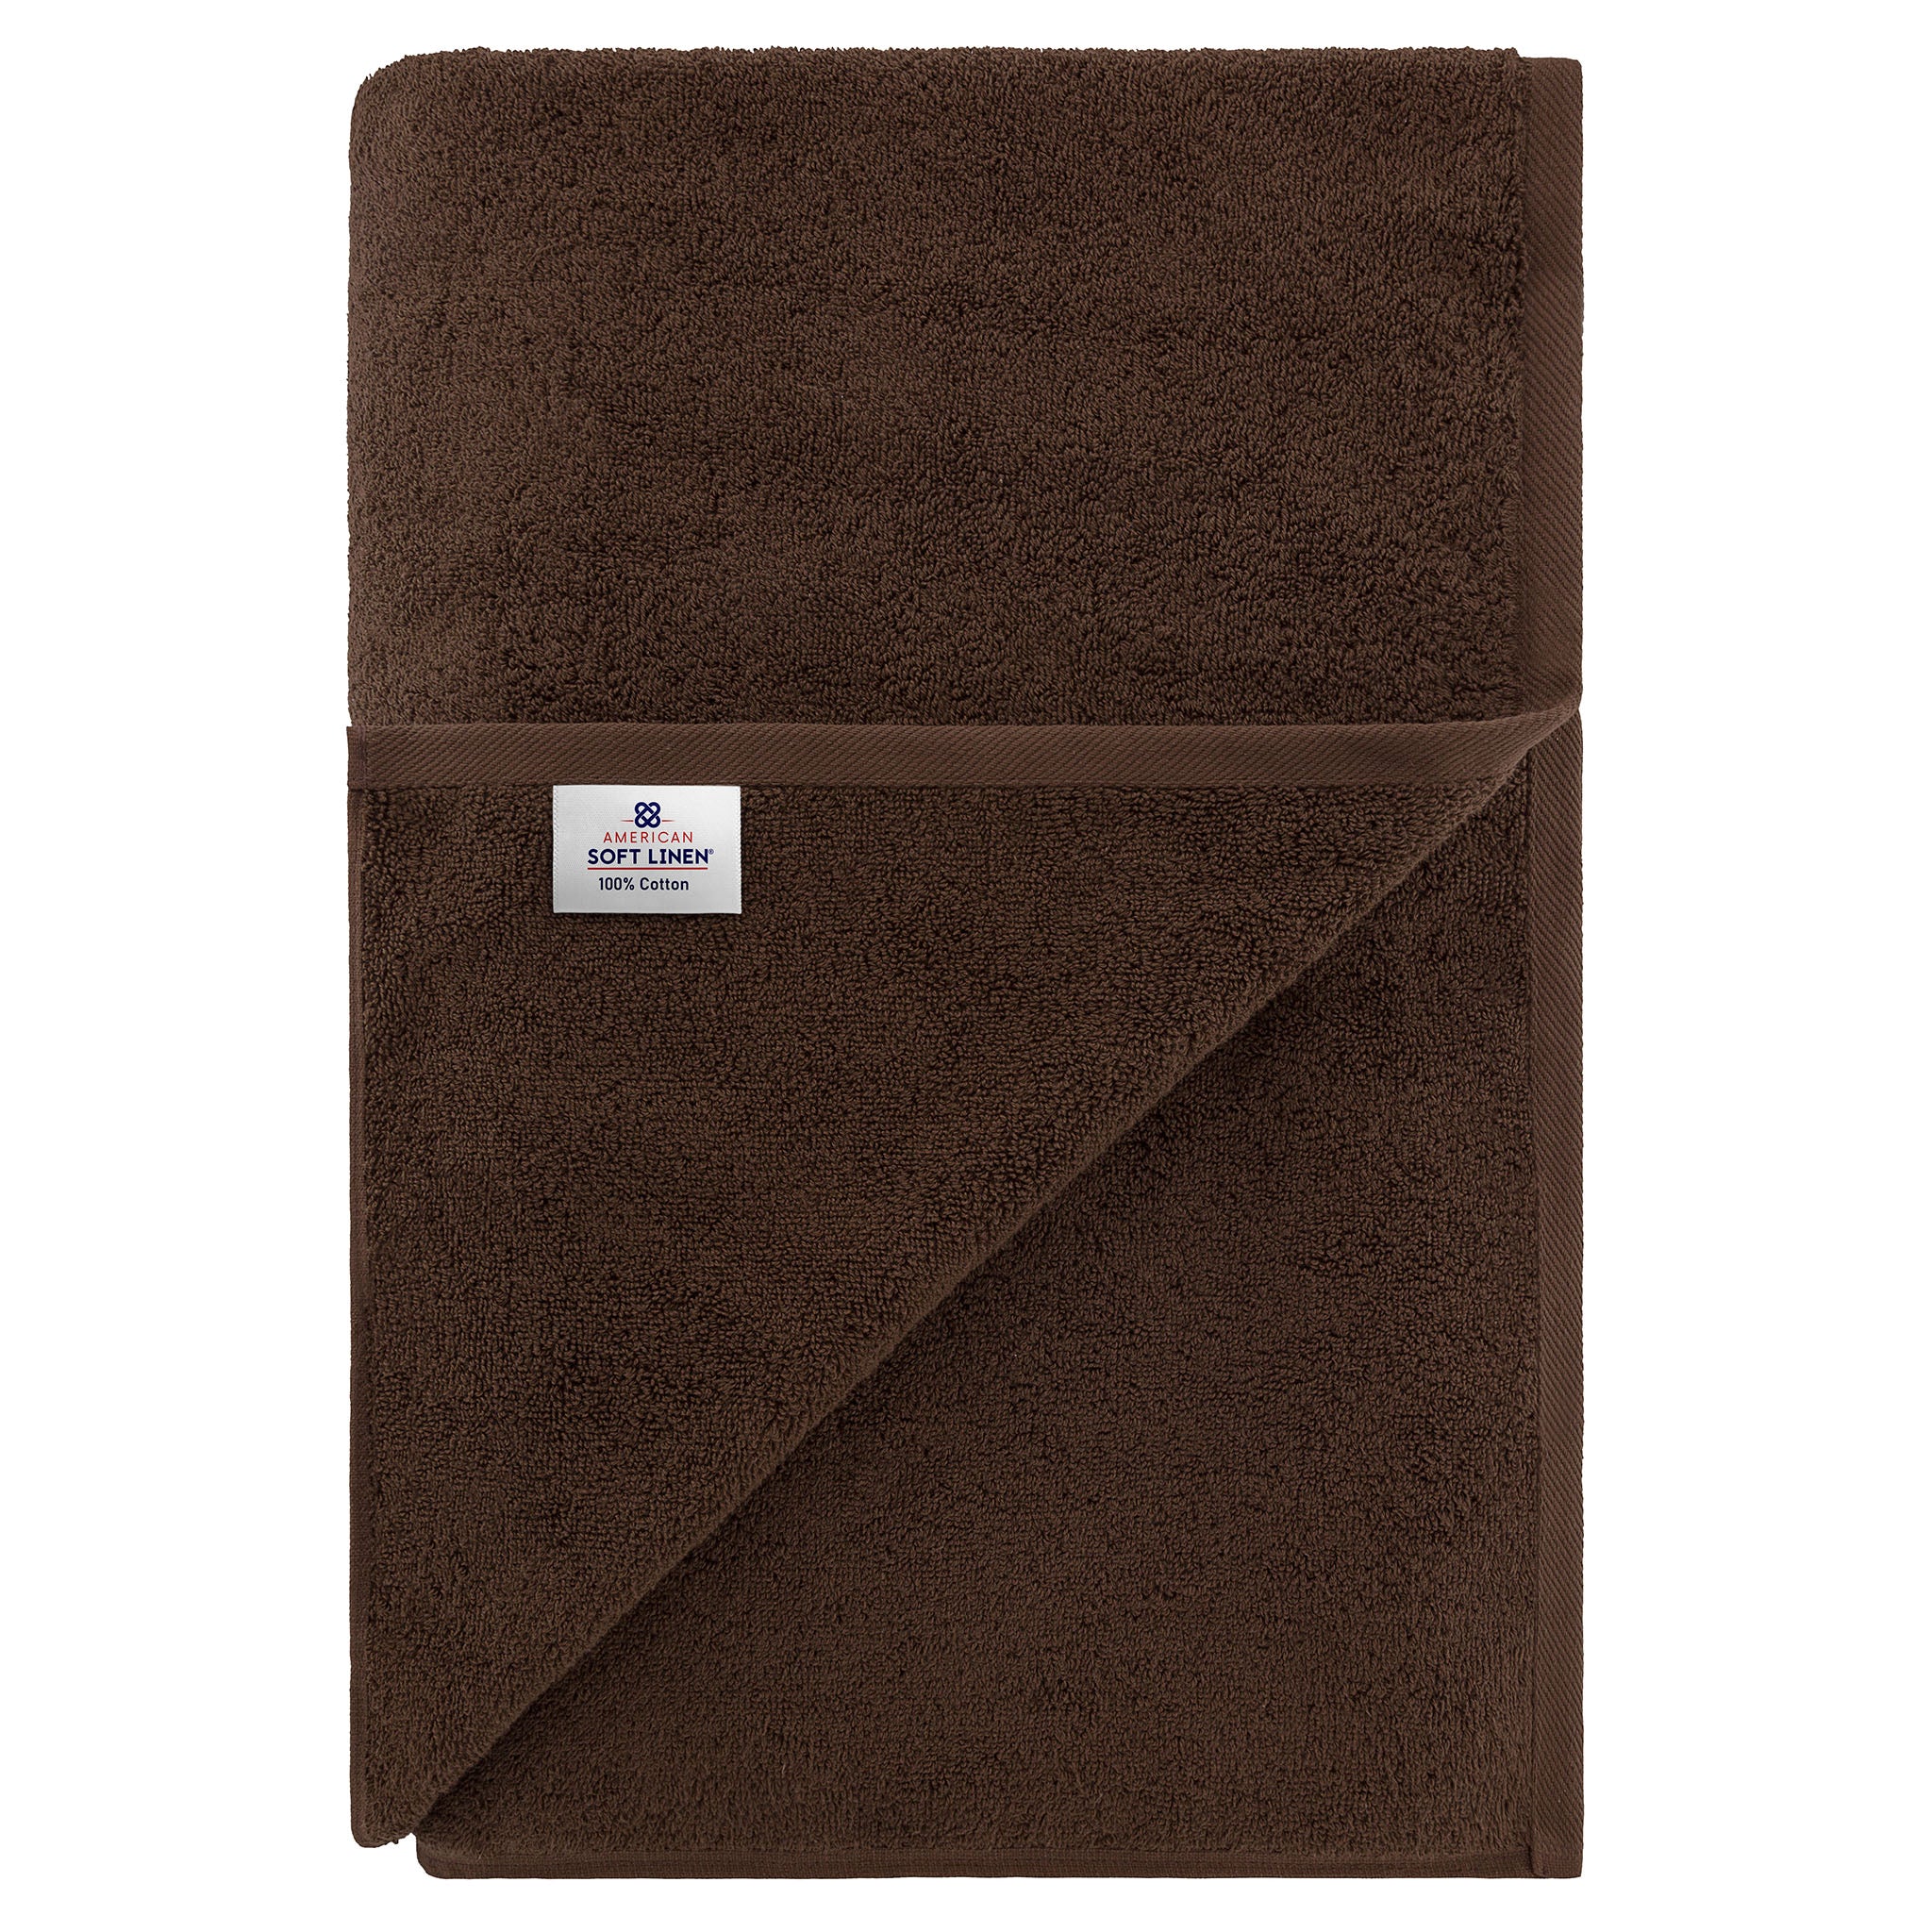 American Soft Linen 100% Ring Spun Cotton 40x80 Inches Oversized Bath Sheets chocolate-brown-7